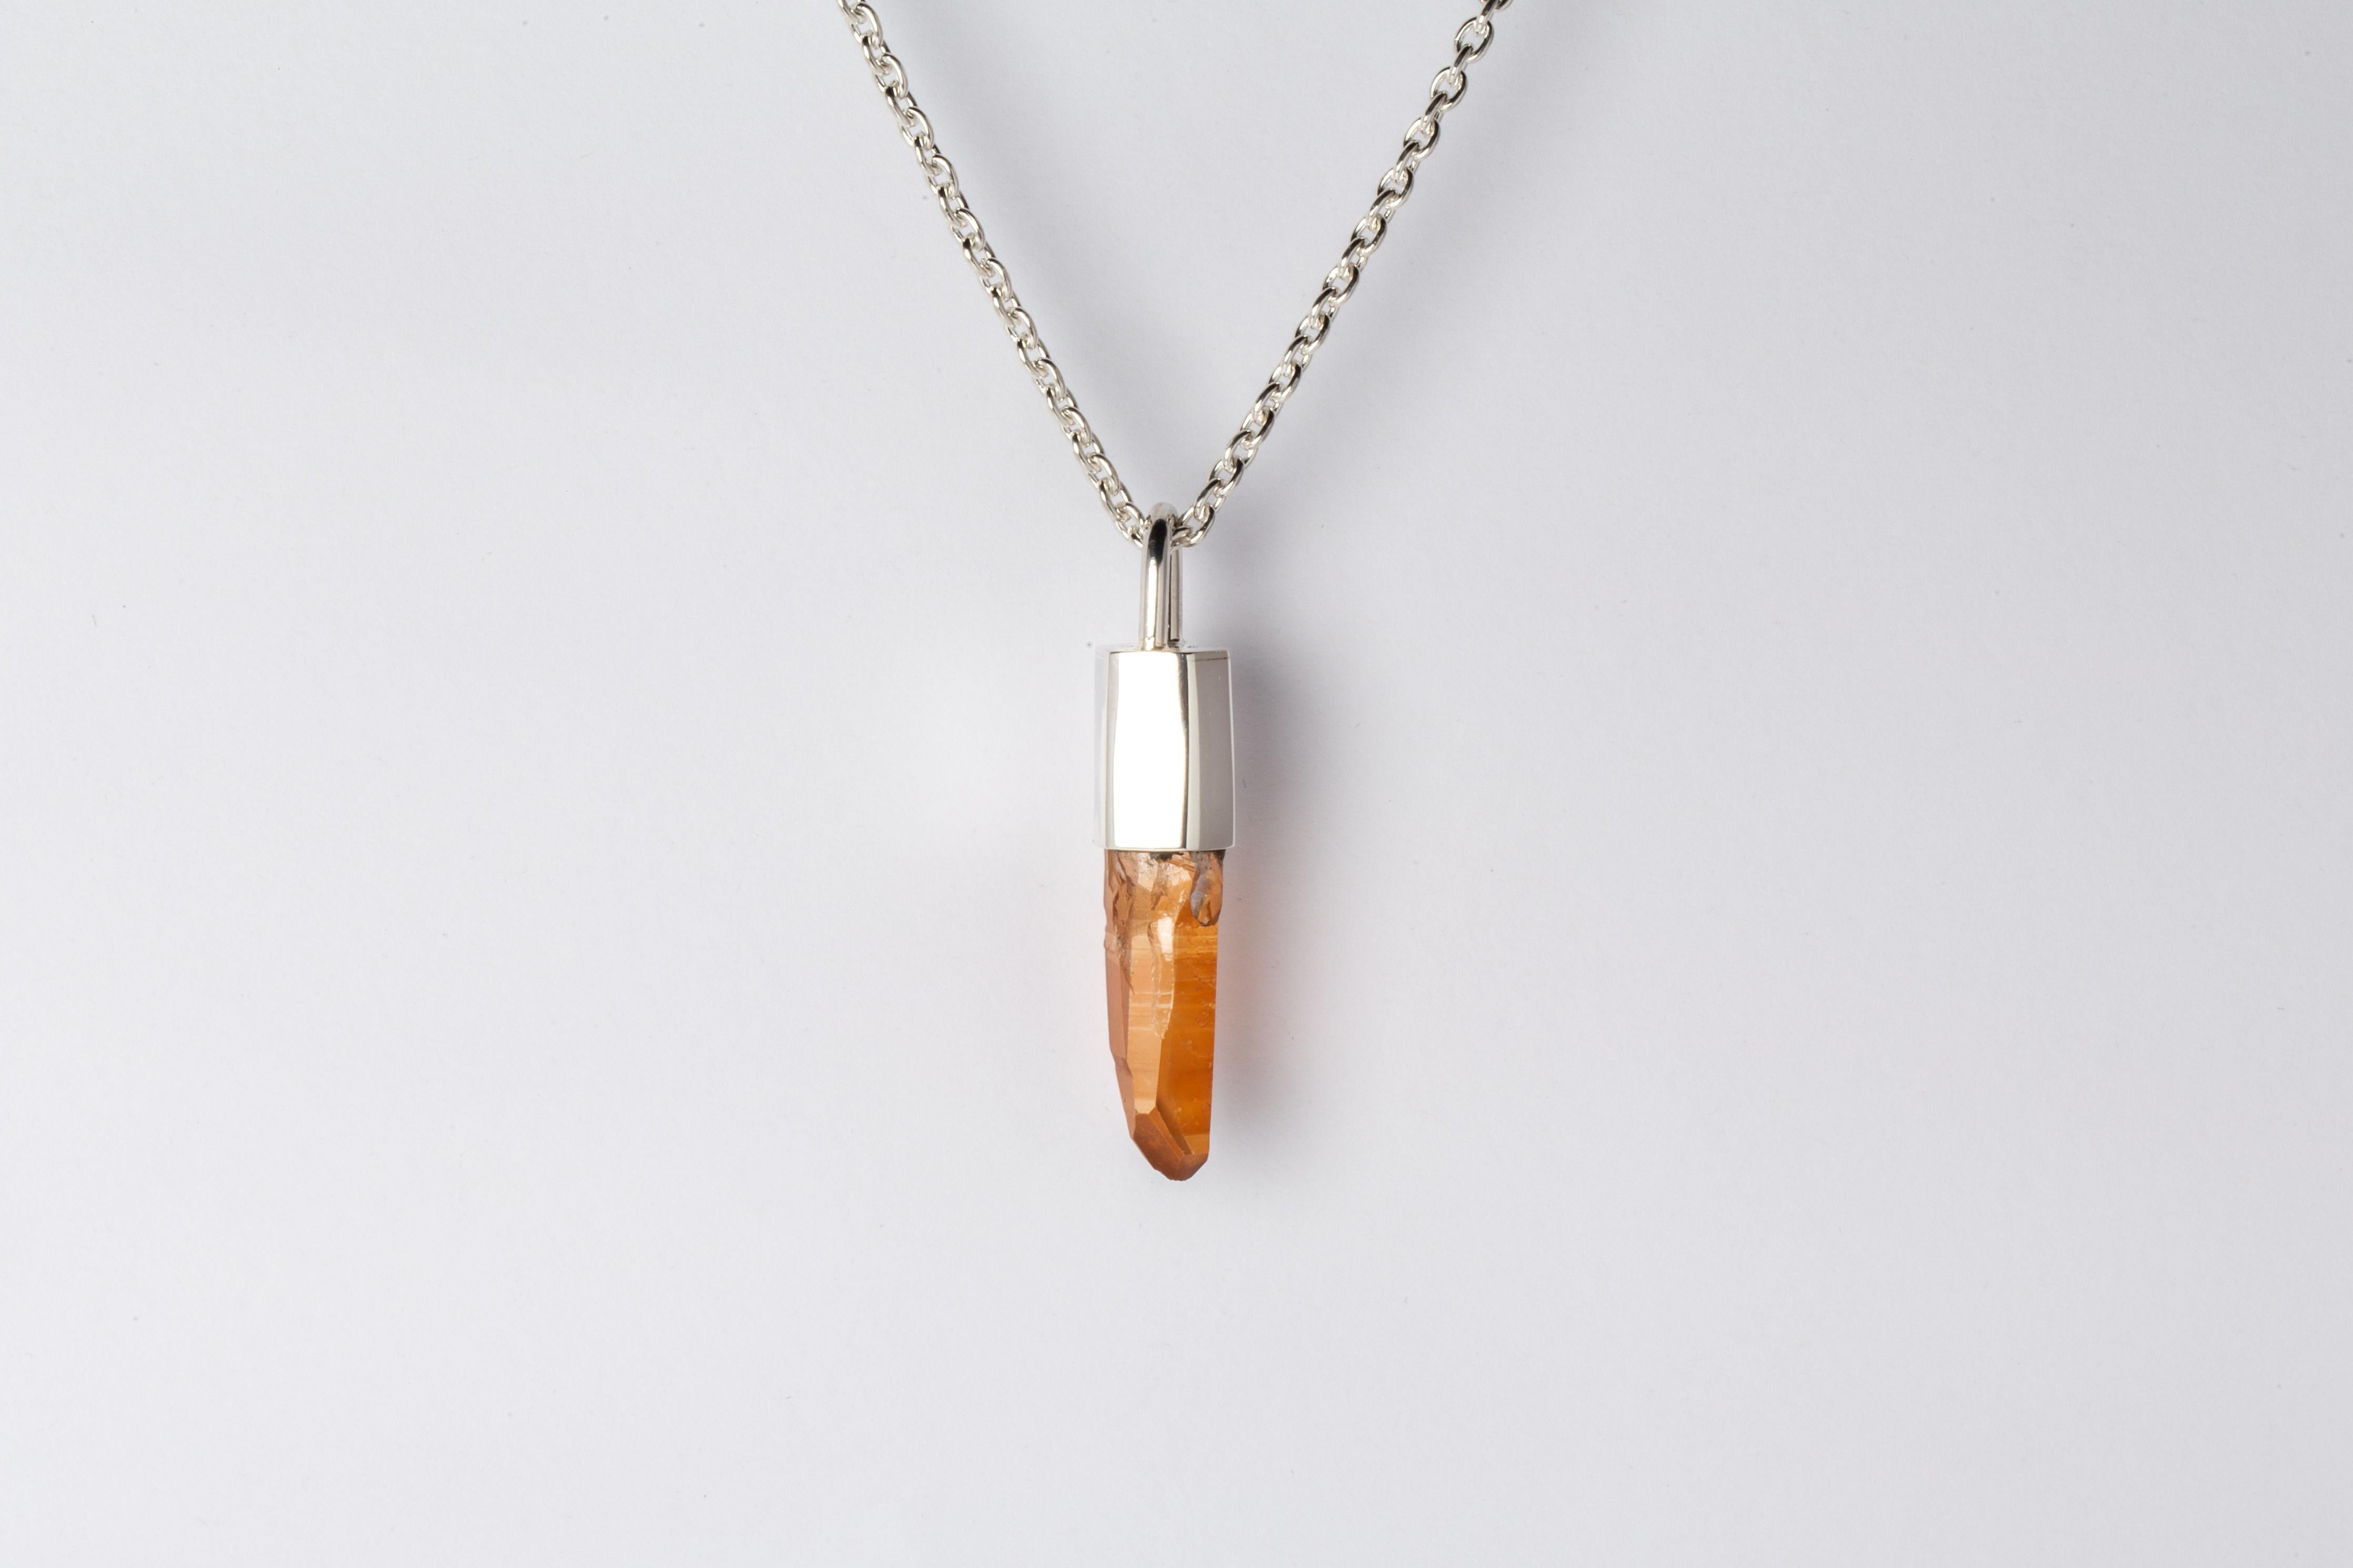 Pendant necklace in polished sterling silver and a rough of iron quartz. It comes on 74 cm sterling silver chain.
The Talisman series is an exploration into the power of natural crystals. The crystals used in these pieces are discovered through